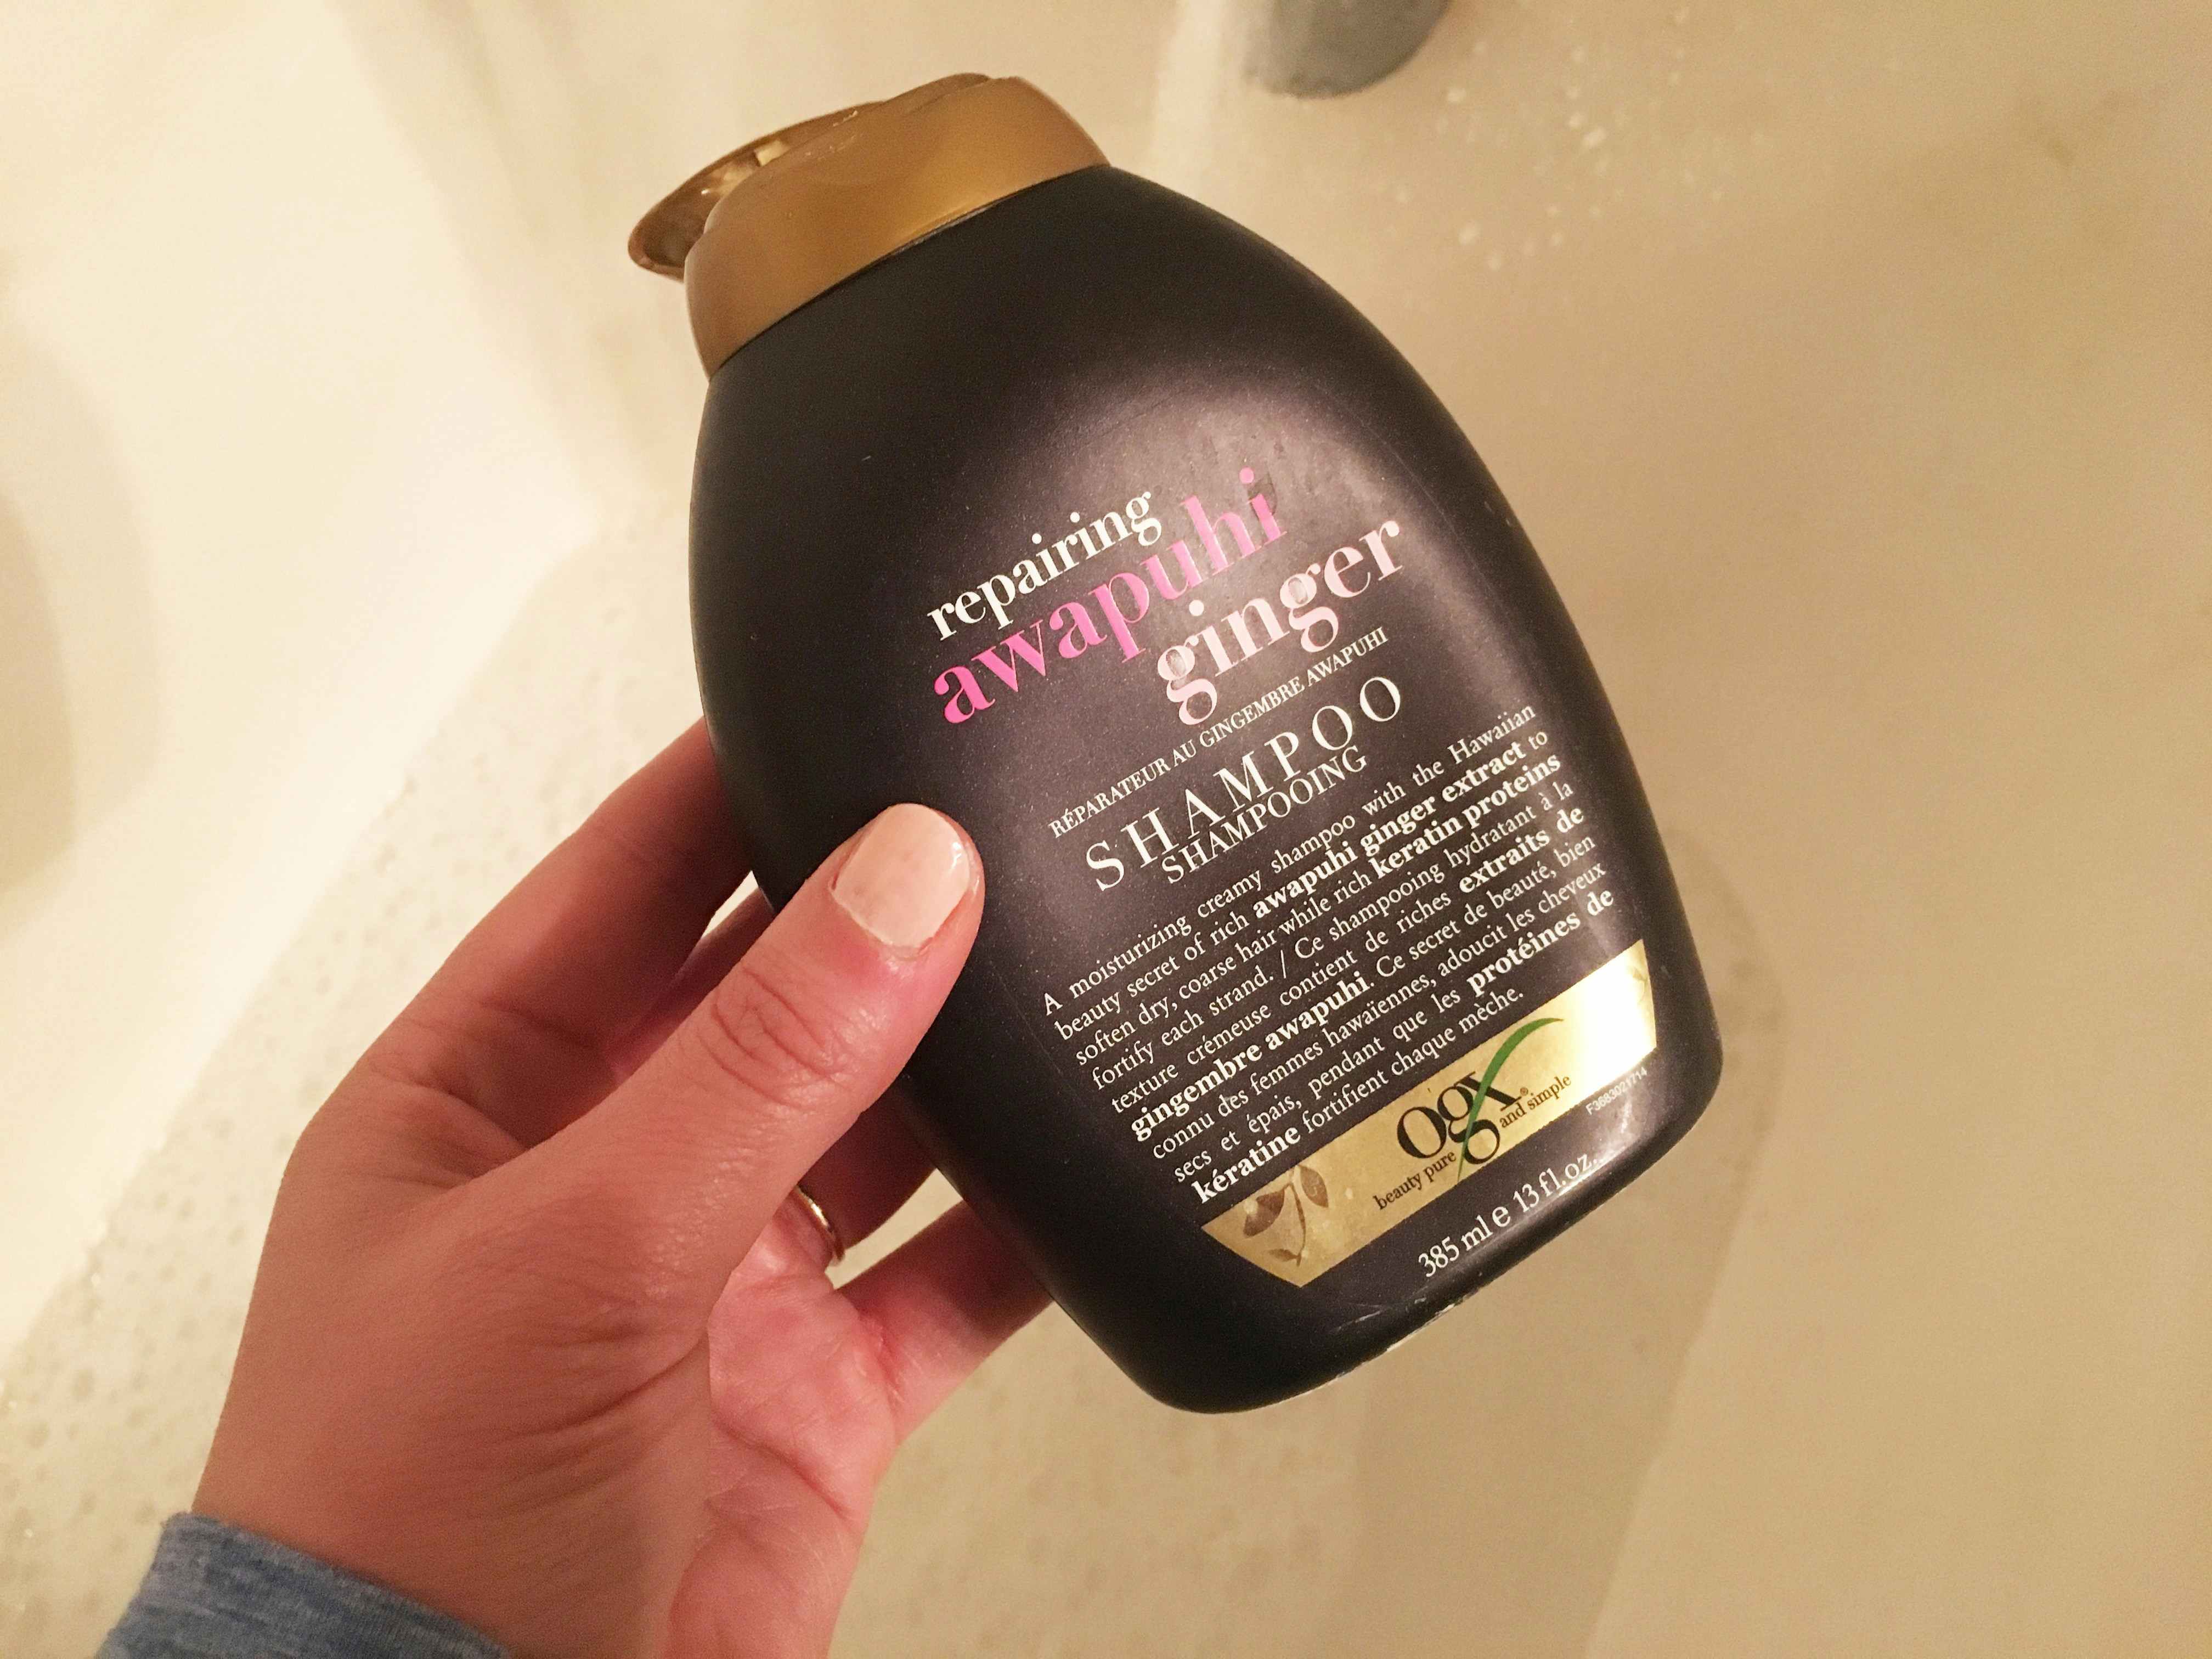 Use shampoo instead of bubble bath, and get the same results.